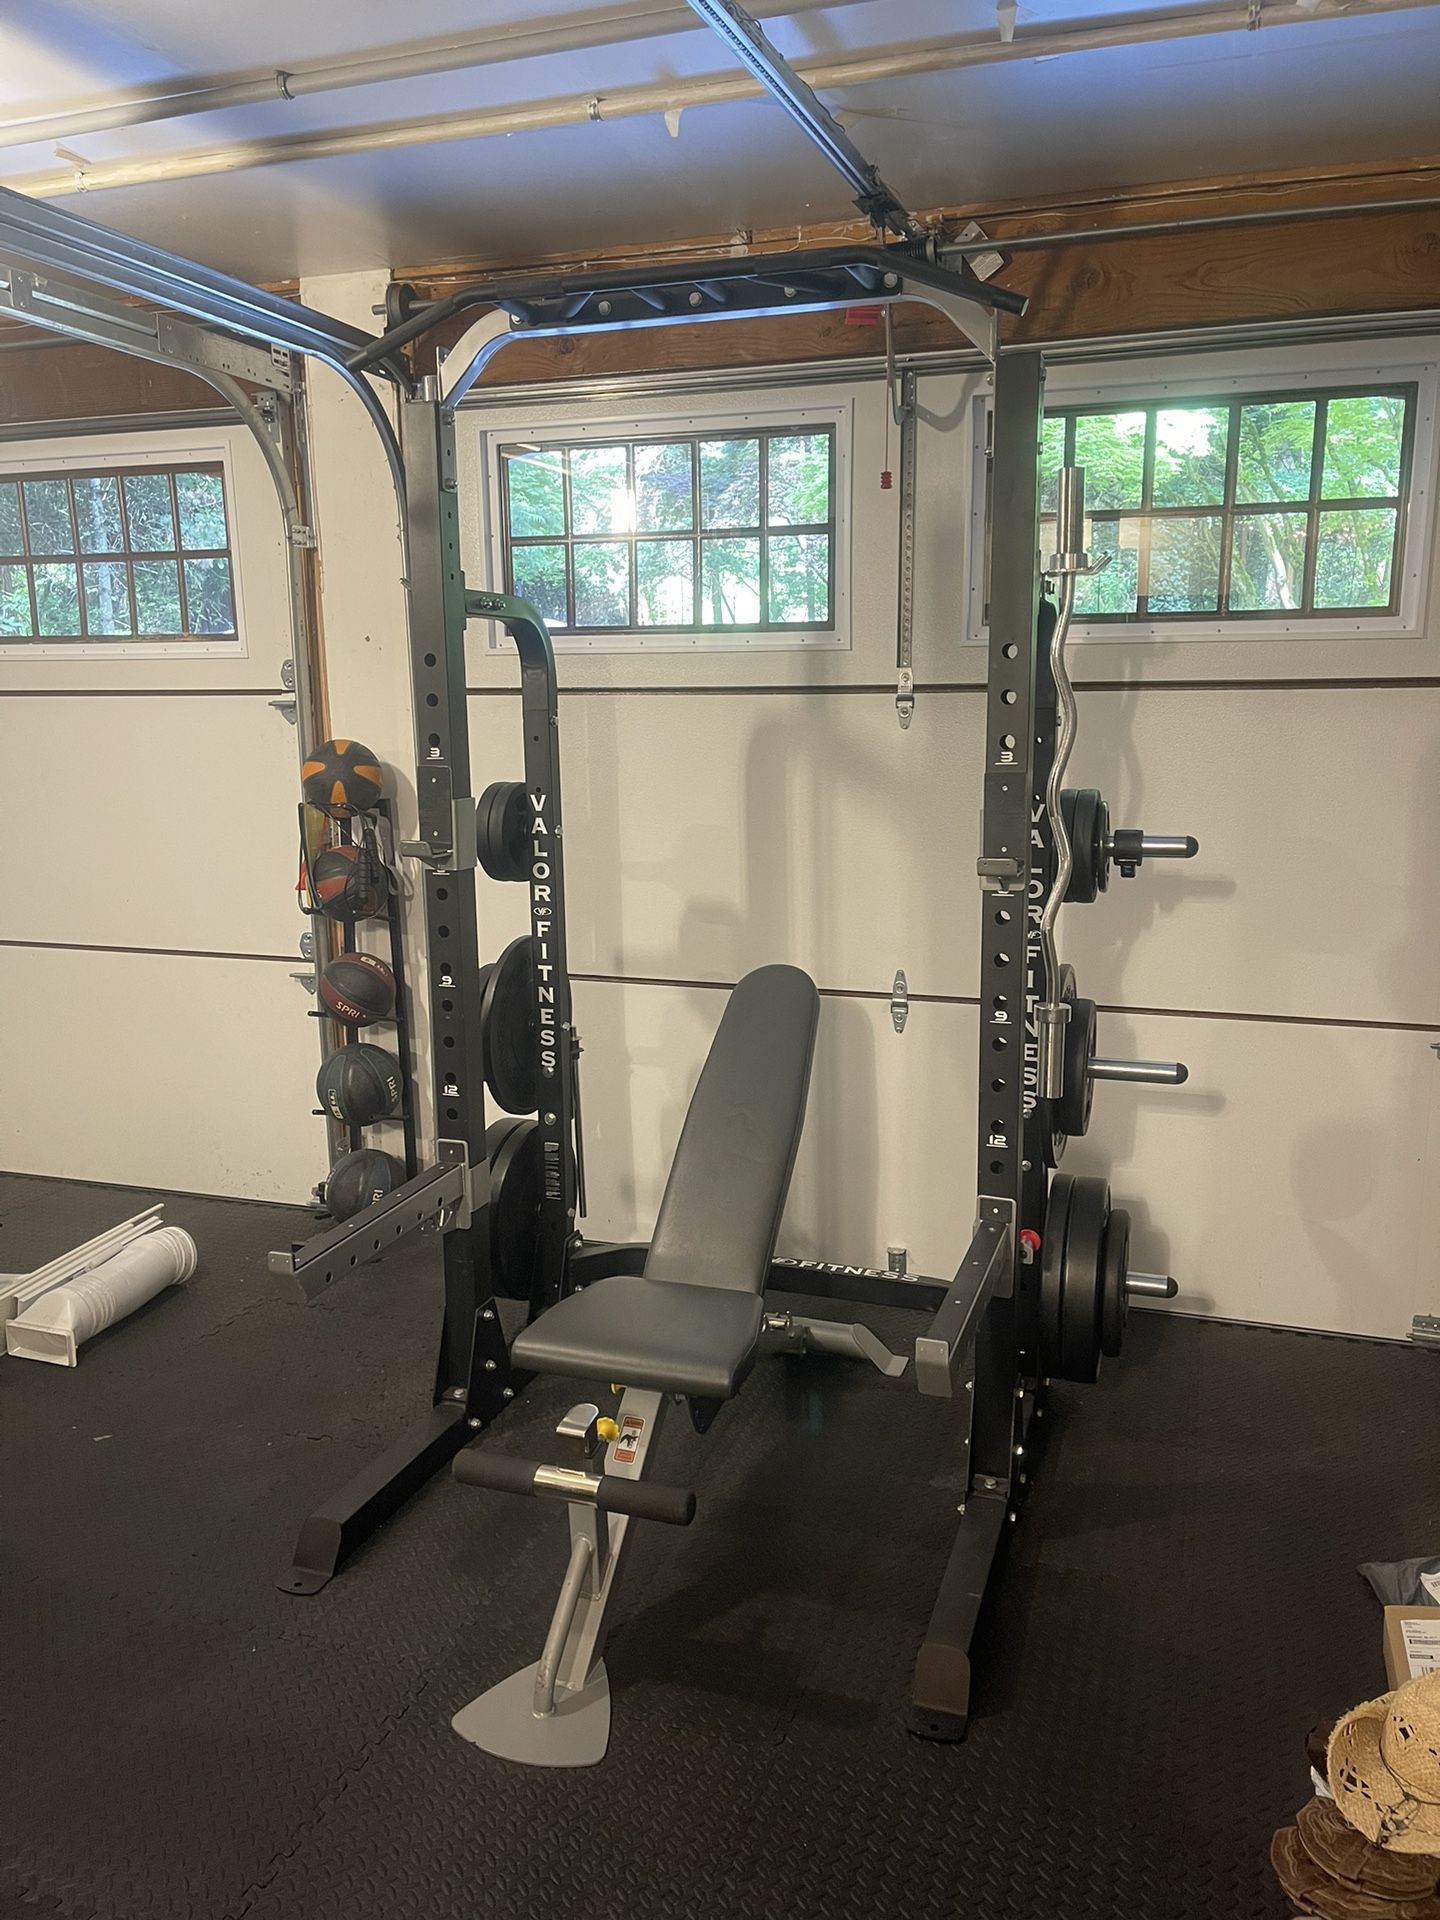 Valor Fitness Squat Rack/Bench Press With Bars, Bench, And Weights